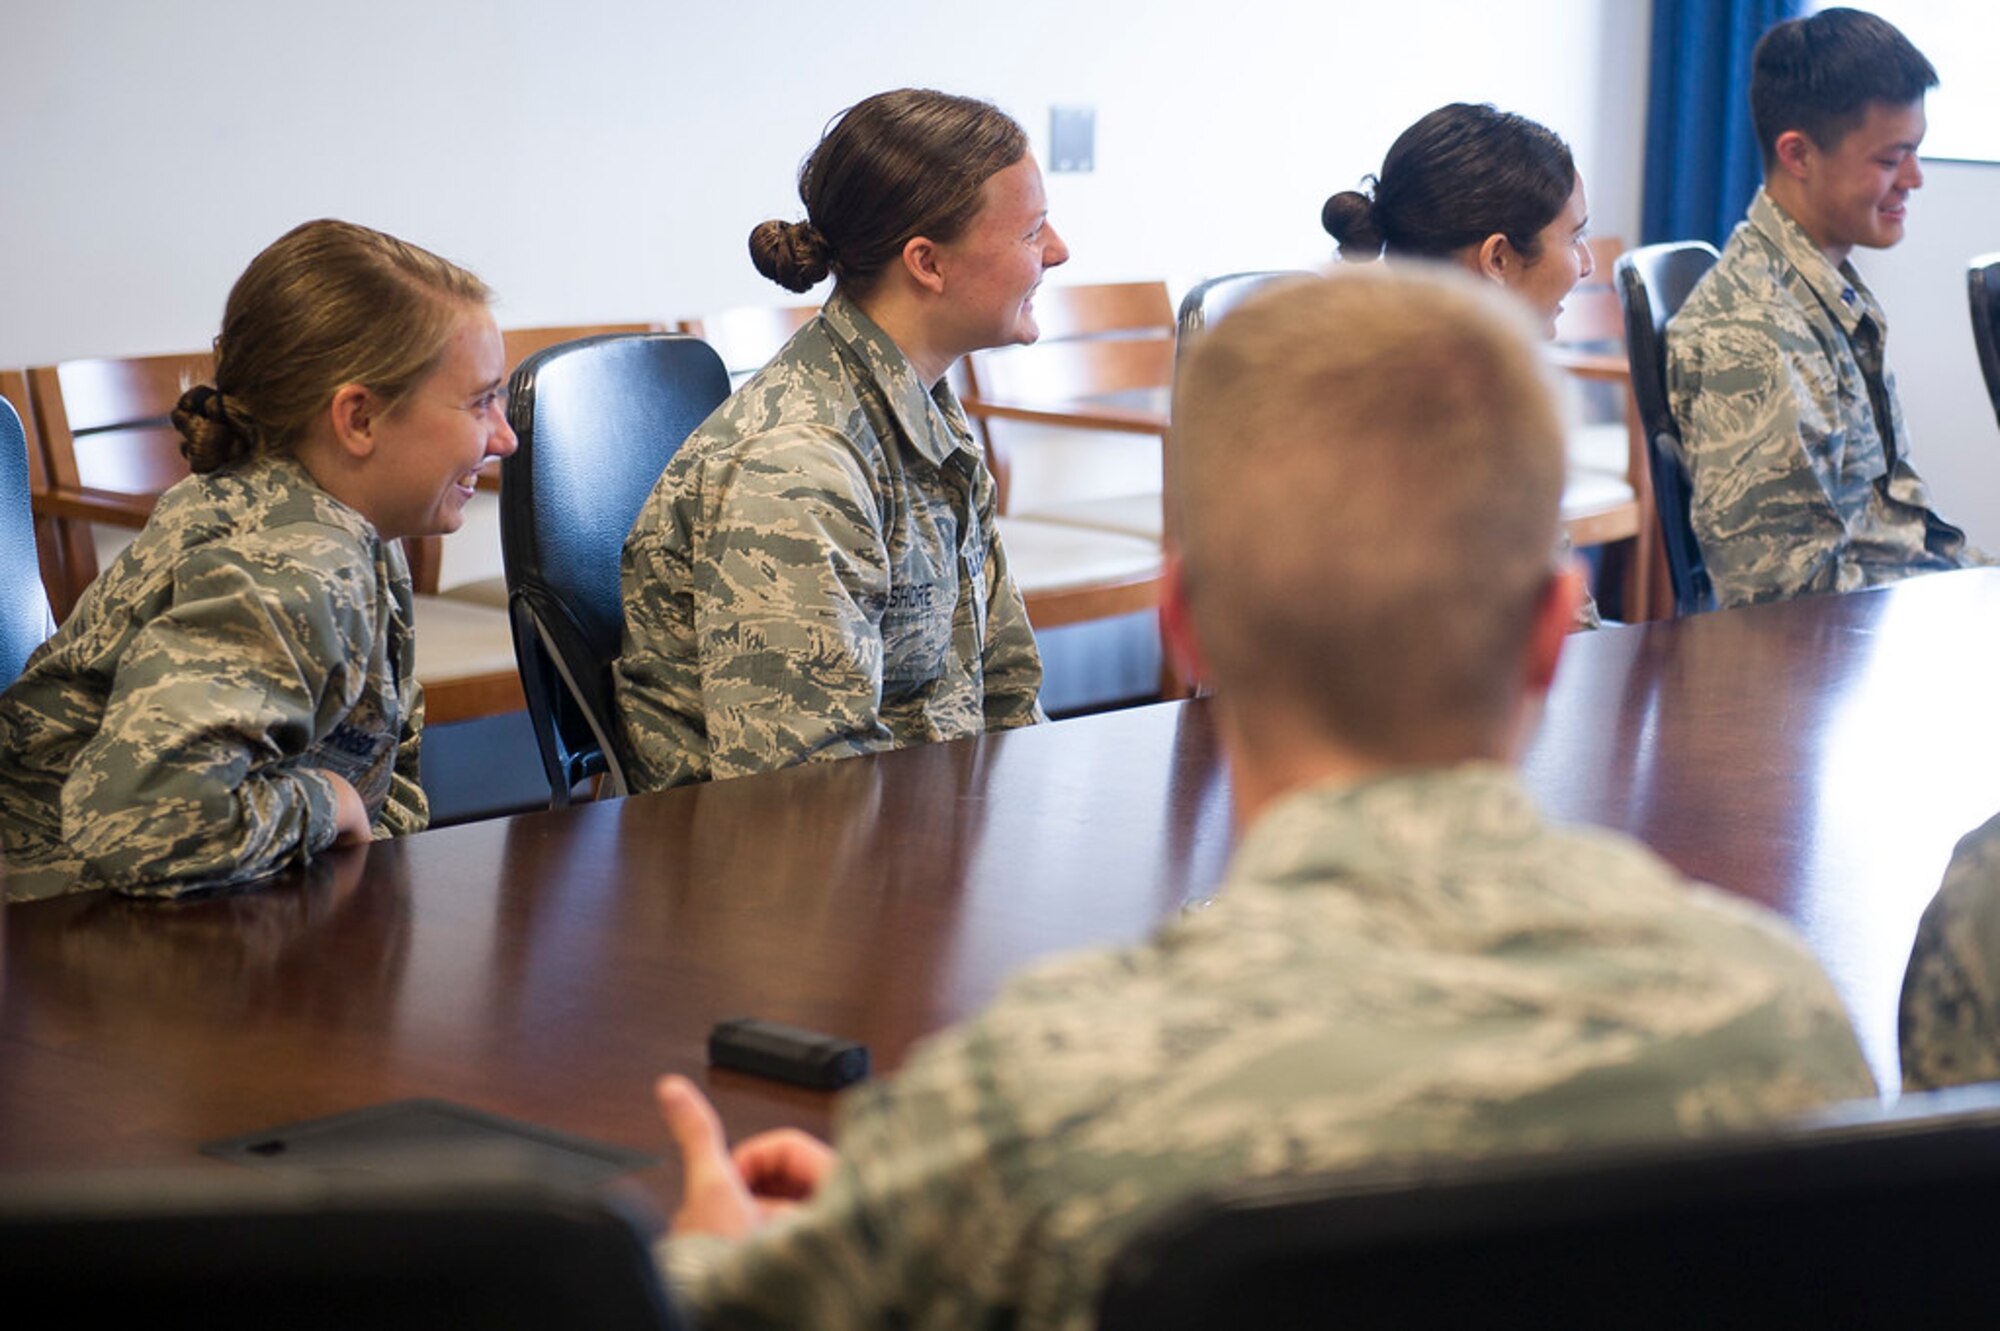 ROTC Cadets from universities across the country laugh during a discussion with Maj. Gen. James A. Jacobson, Air Force District of Washington commander, at Joint Base Andrews, Md., May 22, 2019. The cadets had a chance to sit down with Jacobson during a stop while touring the Washington area. (U.S. Air Force photo by Master Sgt. Michael B. Keller)